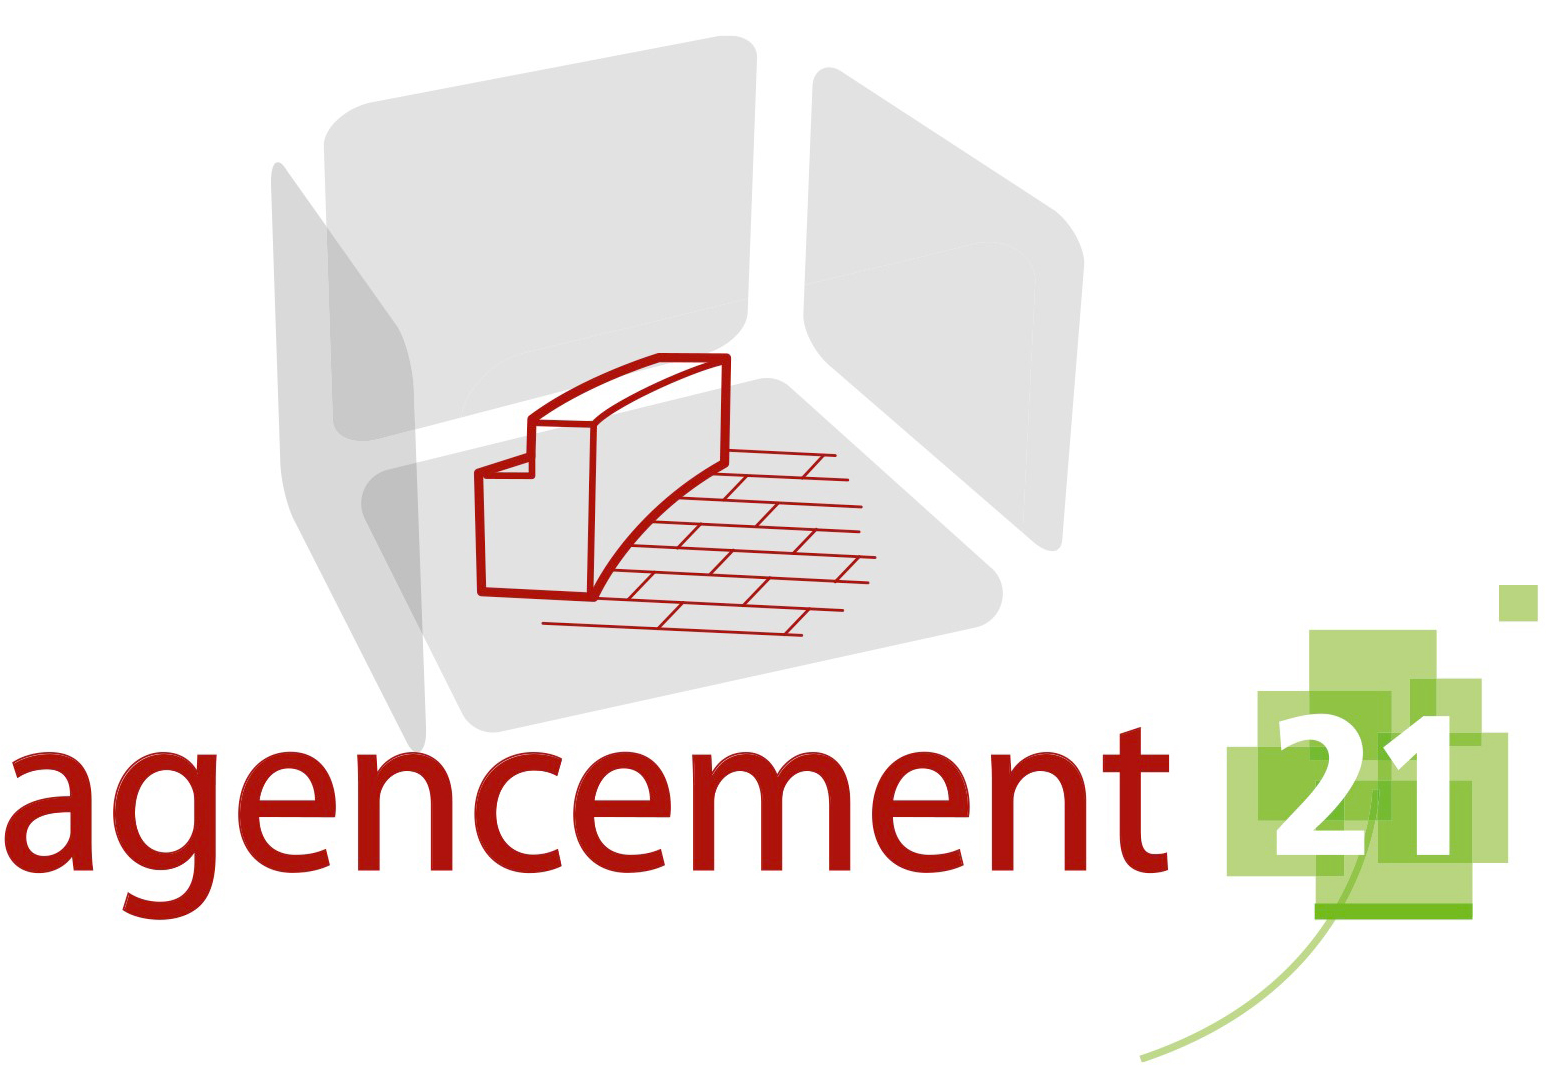 Agencement 21